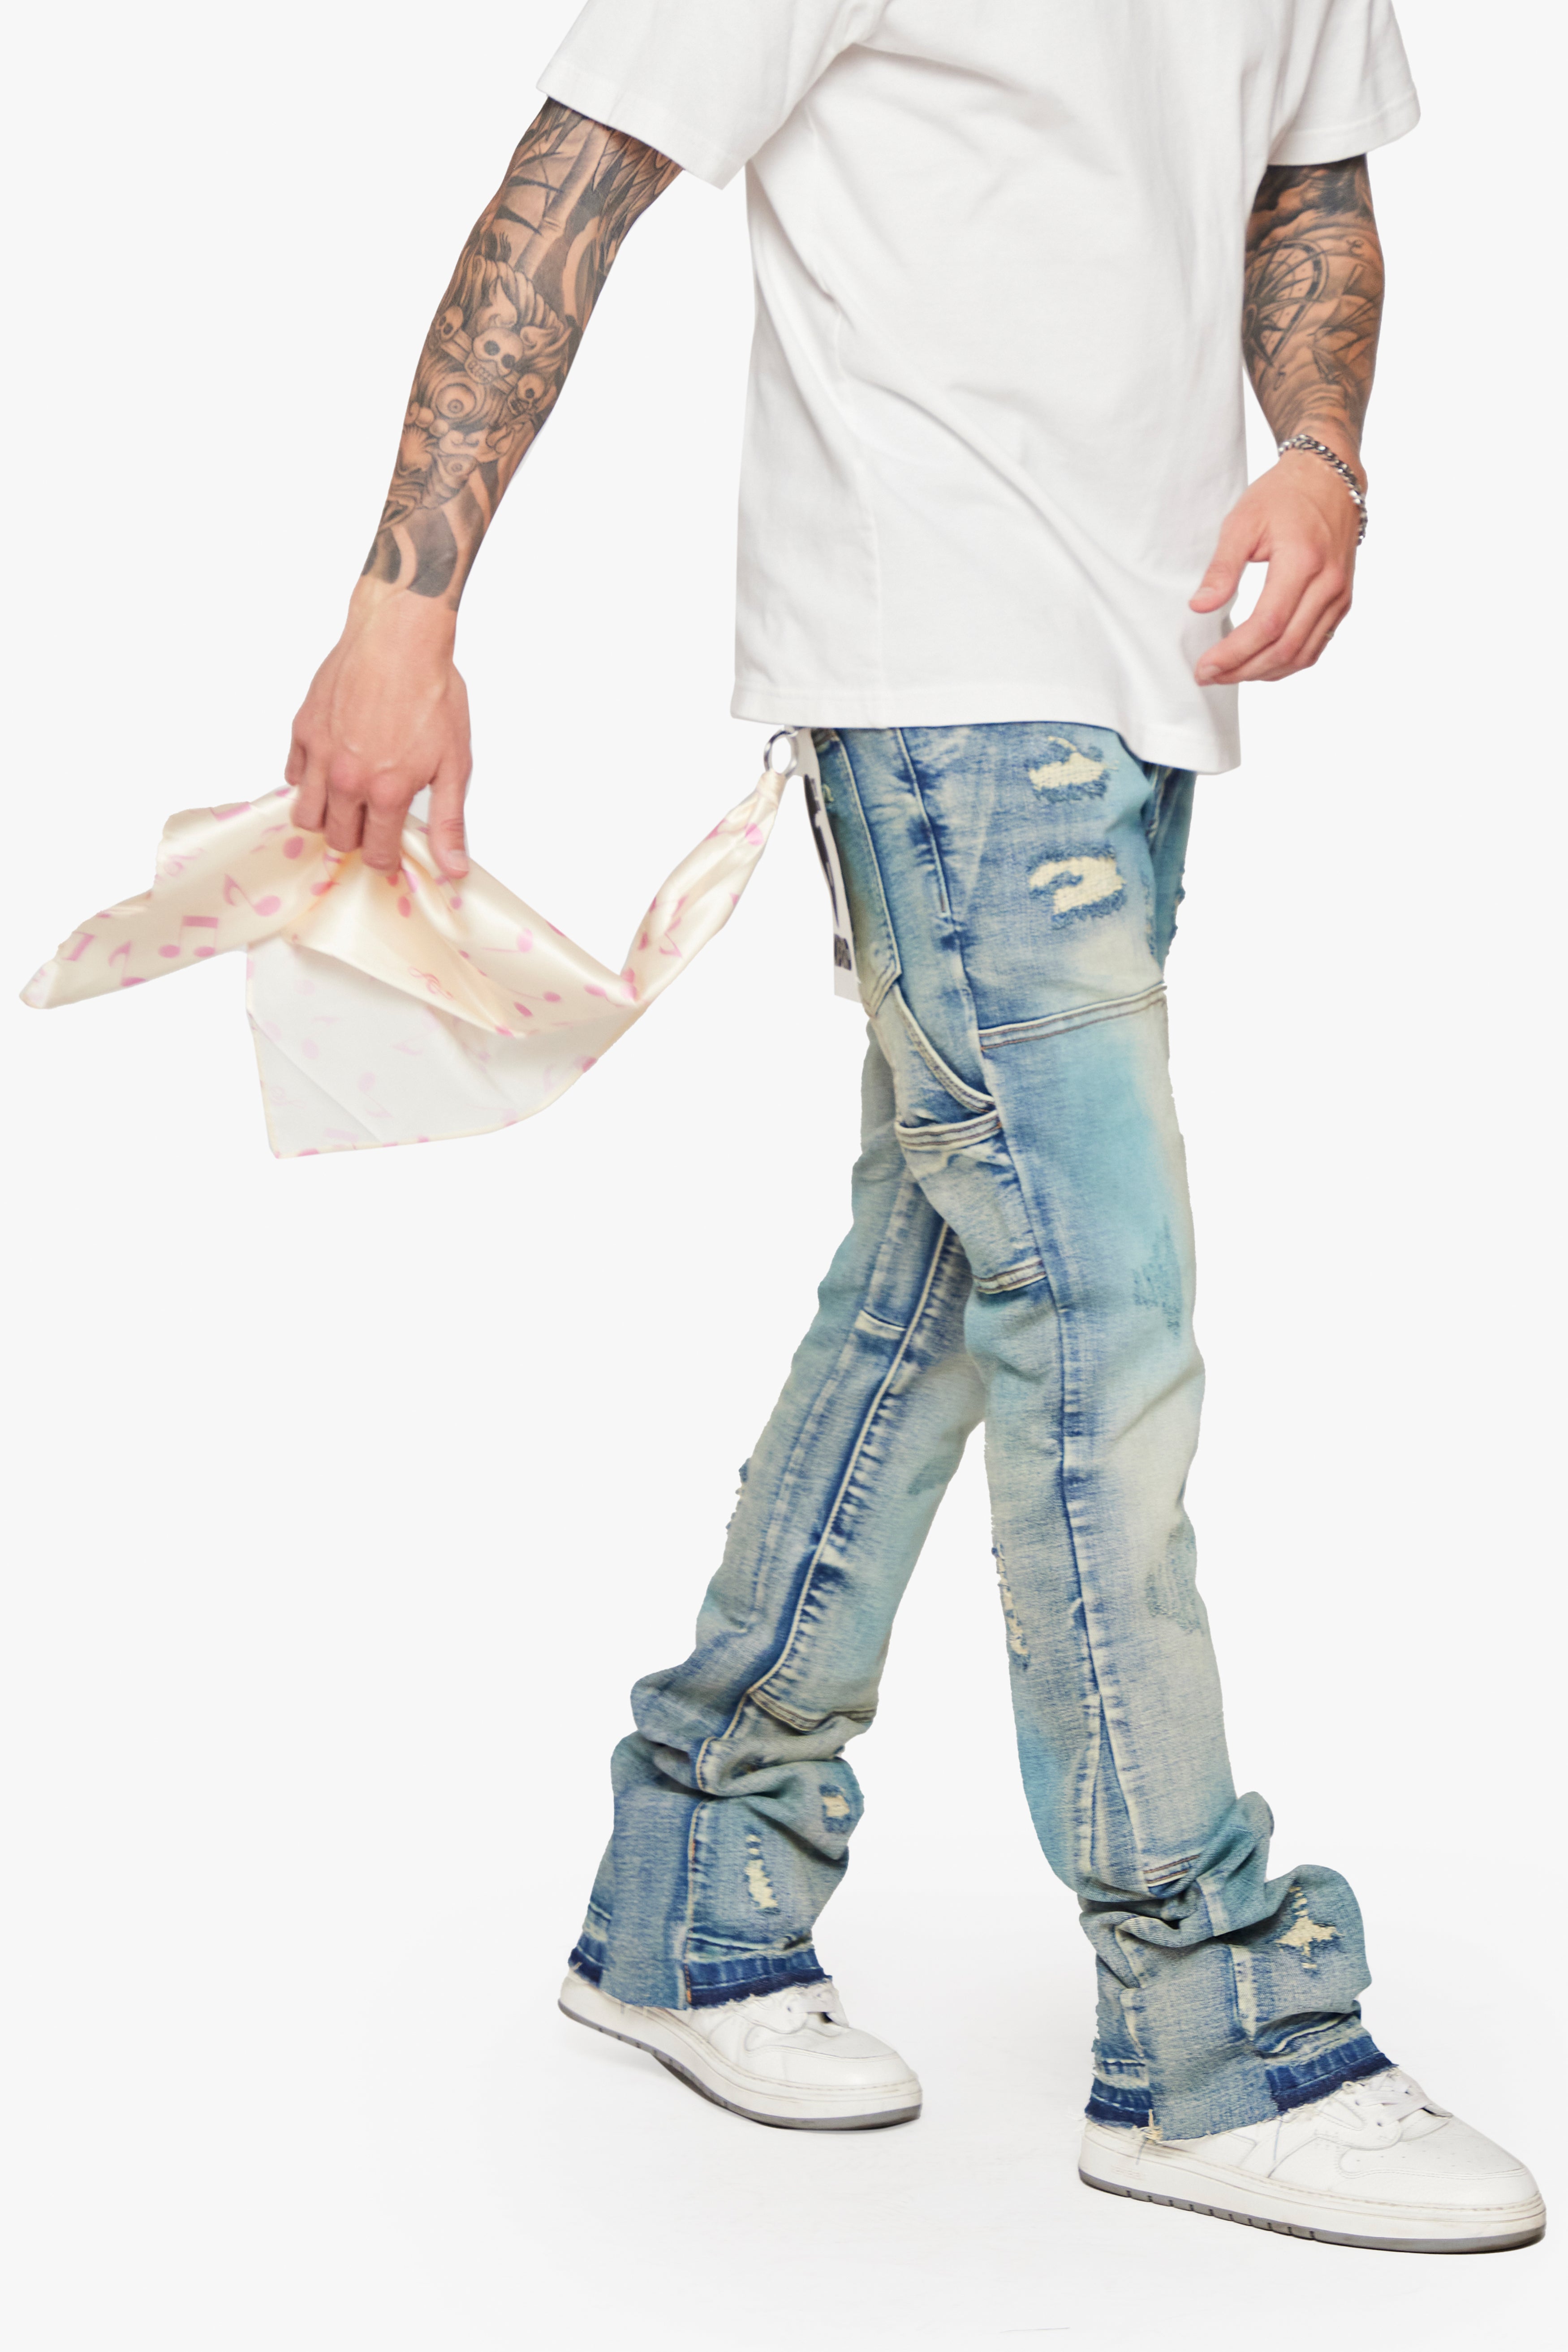 Extreme Ripped Sand Blasted Denim Jeans